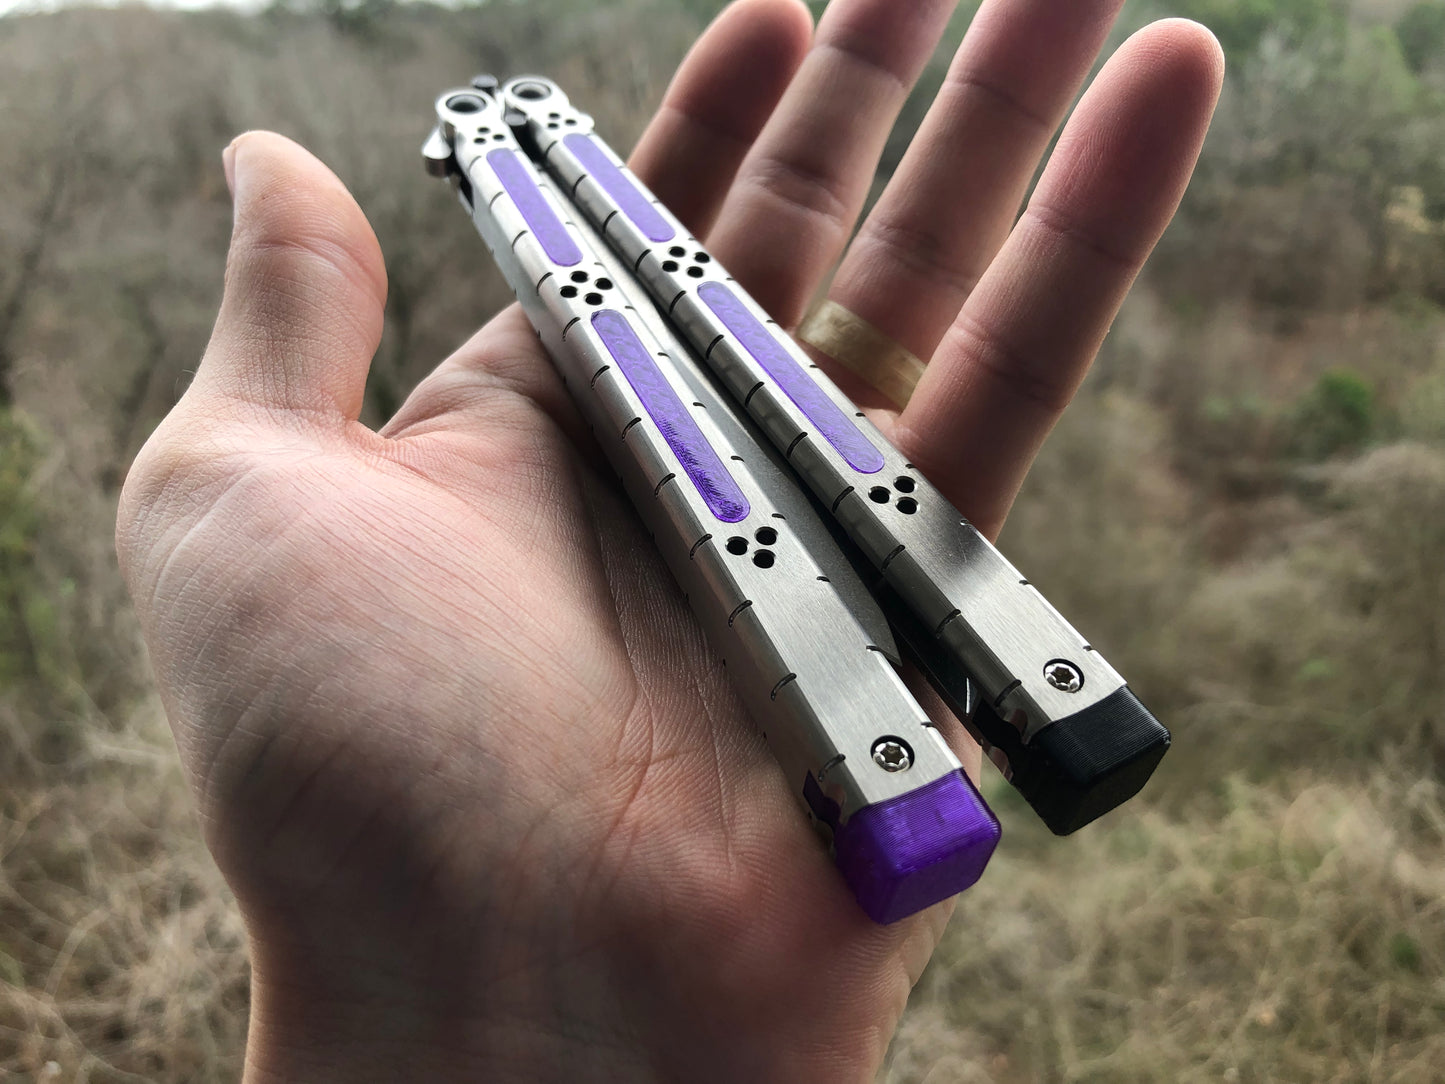 Reduce the handle bias of your HOM i-Basilisk, HOM Basilisk-R  (for Titanium and G10/CF variants), and HOM Prodigy balisongs with Zippy extension spacers and handle inlays.